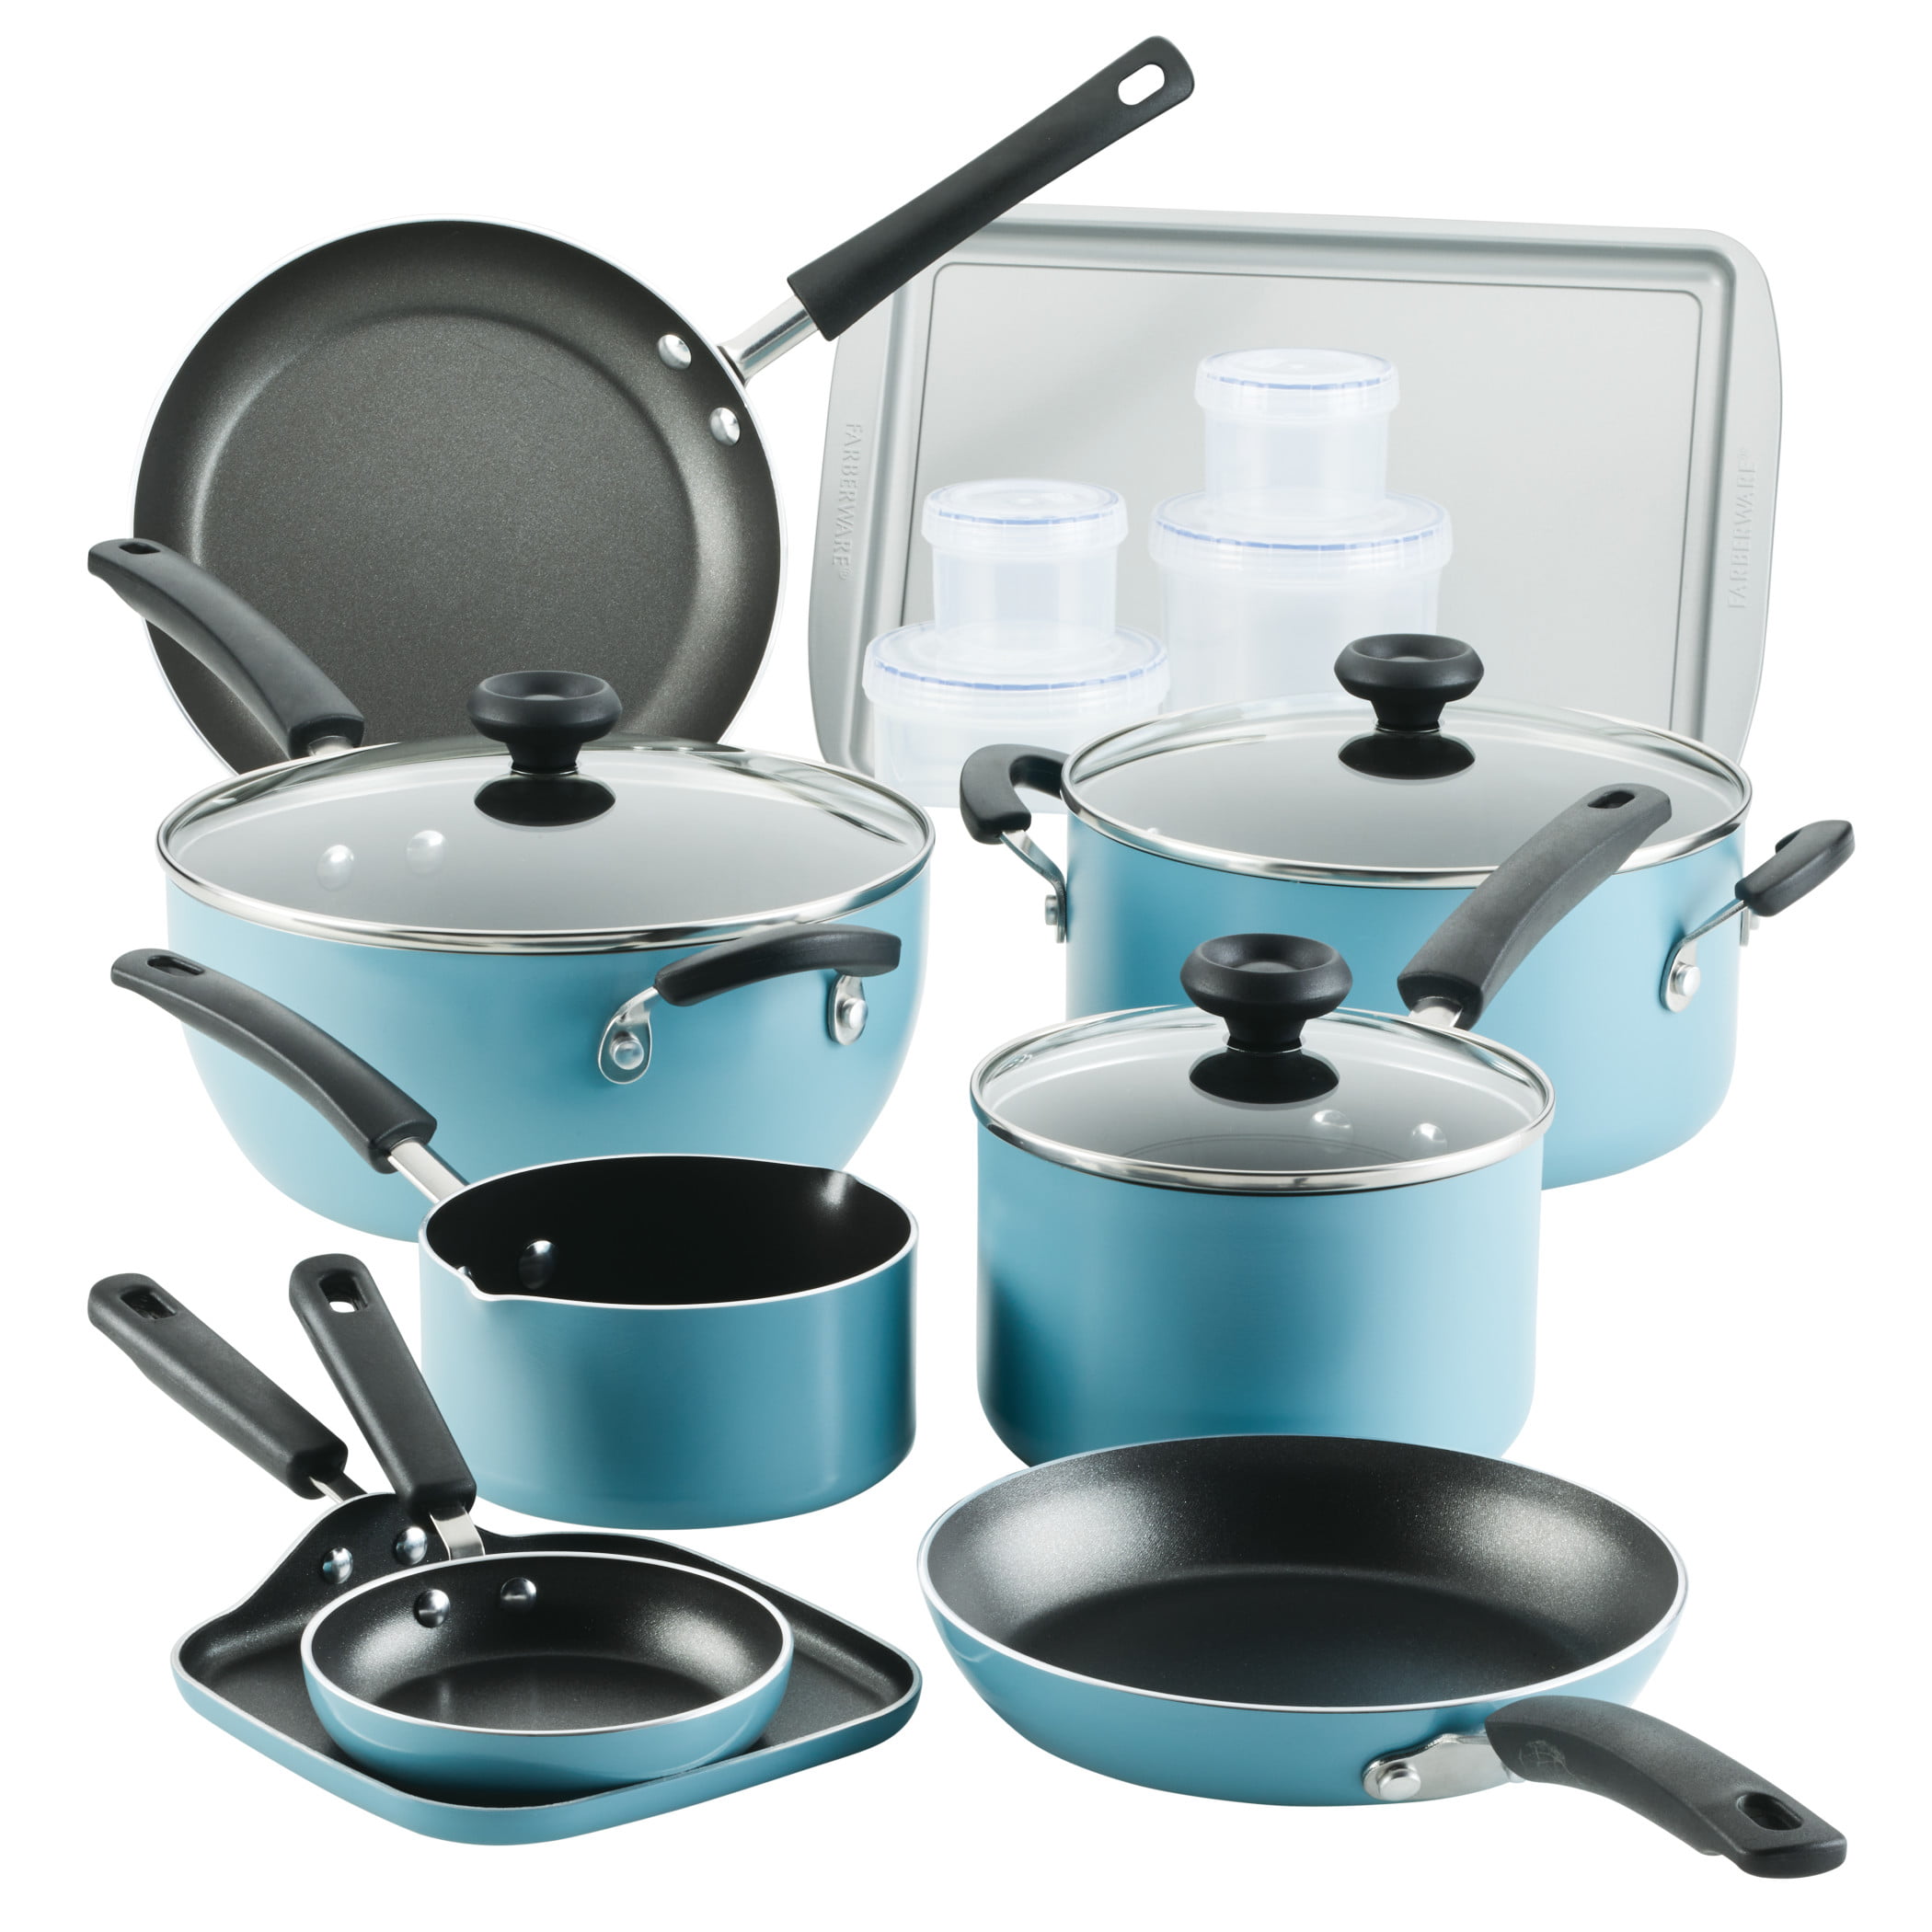 Details about   Nonstick Cookware Set 12 Piece Kitchen Ceramic Pots and Pans with Lids Cooking 